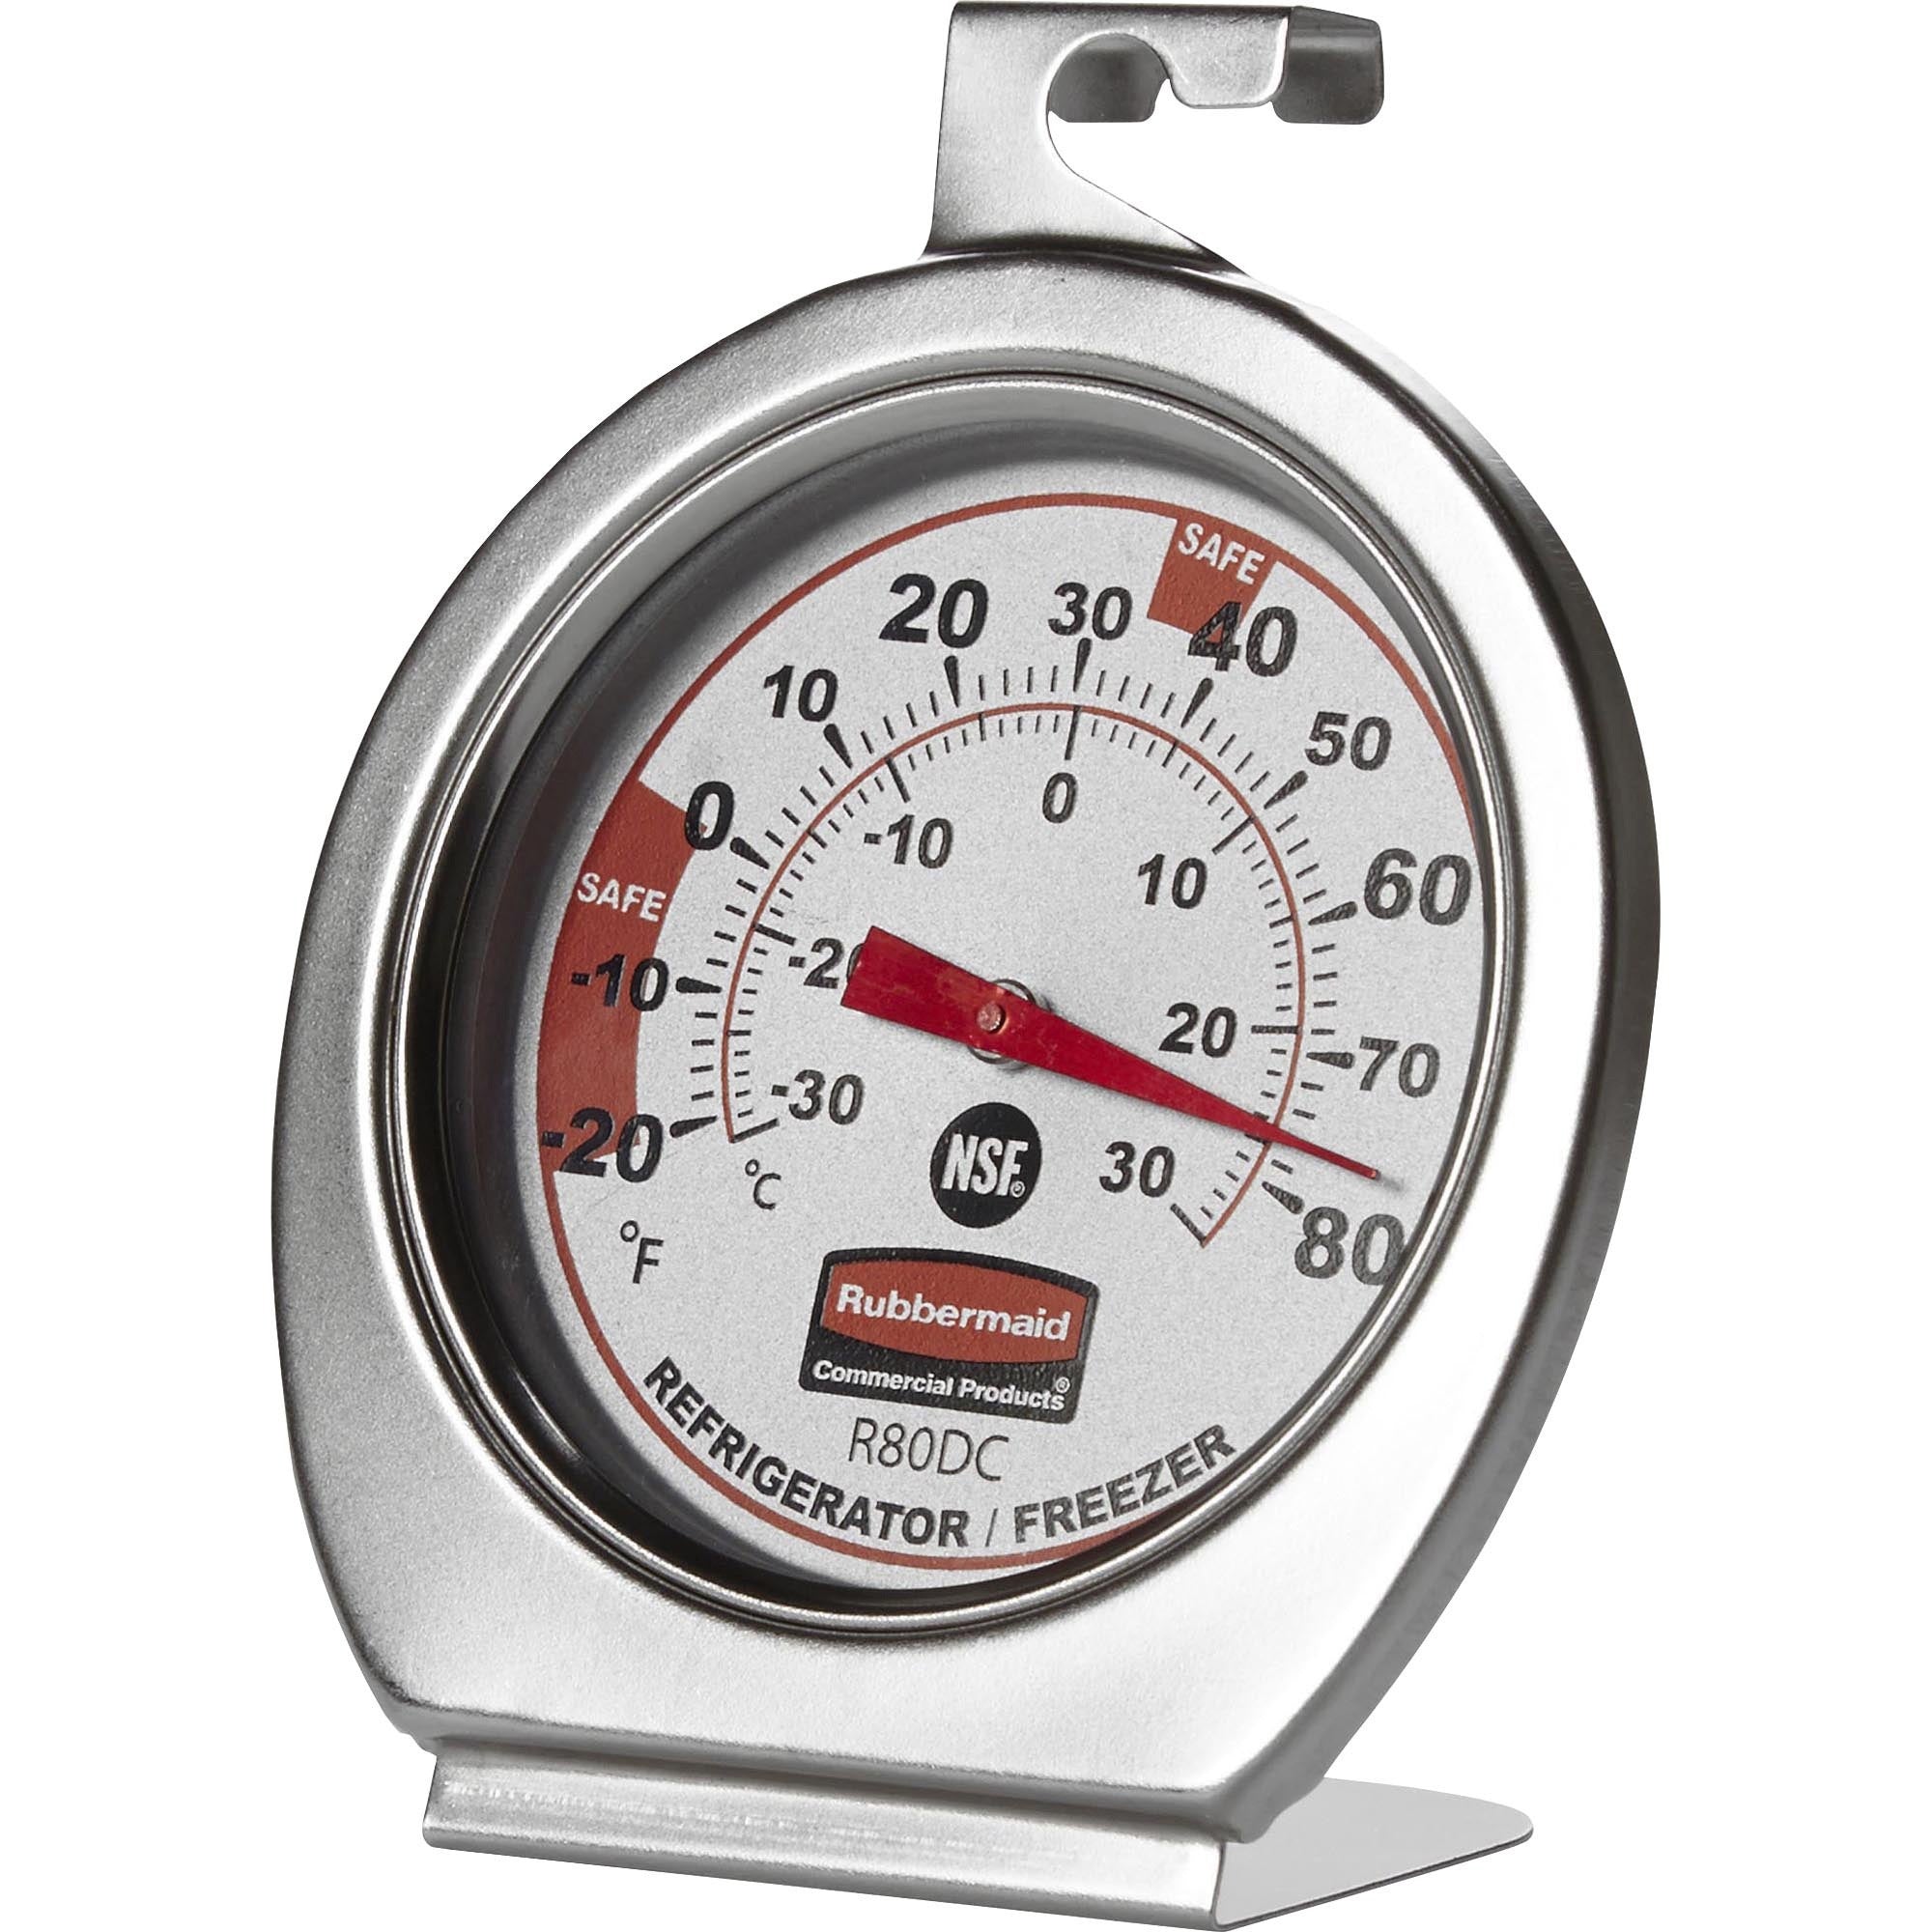 rubbermaid-commercial-refrigerator-freezer-thermometers-large-display-shatter-proof-lens-dual-dial-for-refrigerator-freezer-chrome_rcppelr80dcct - 1